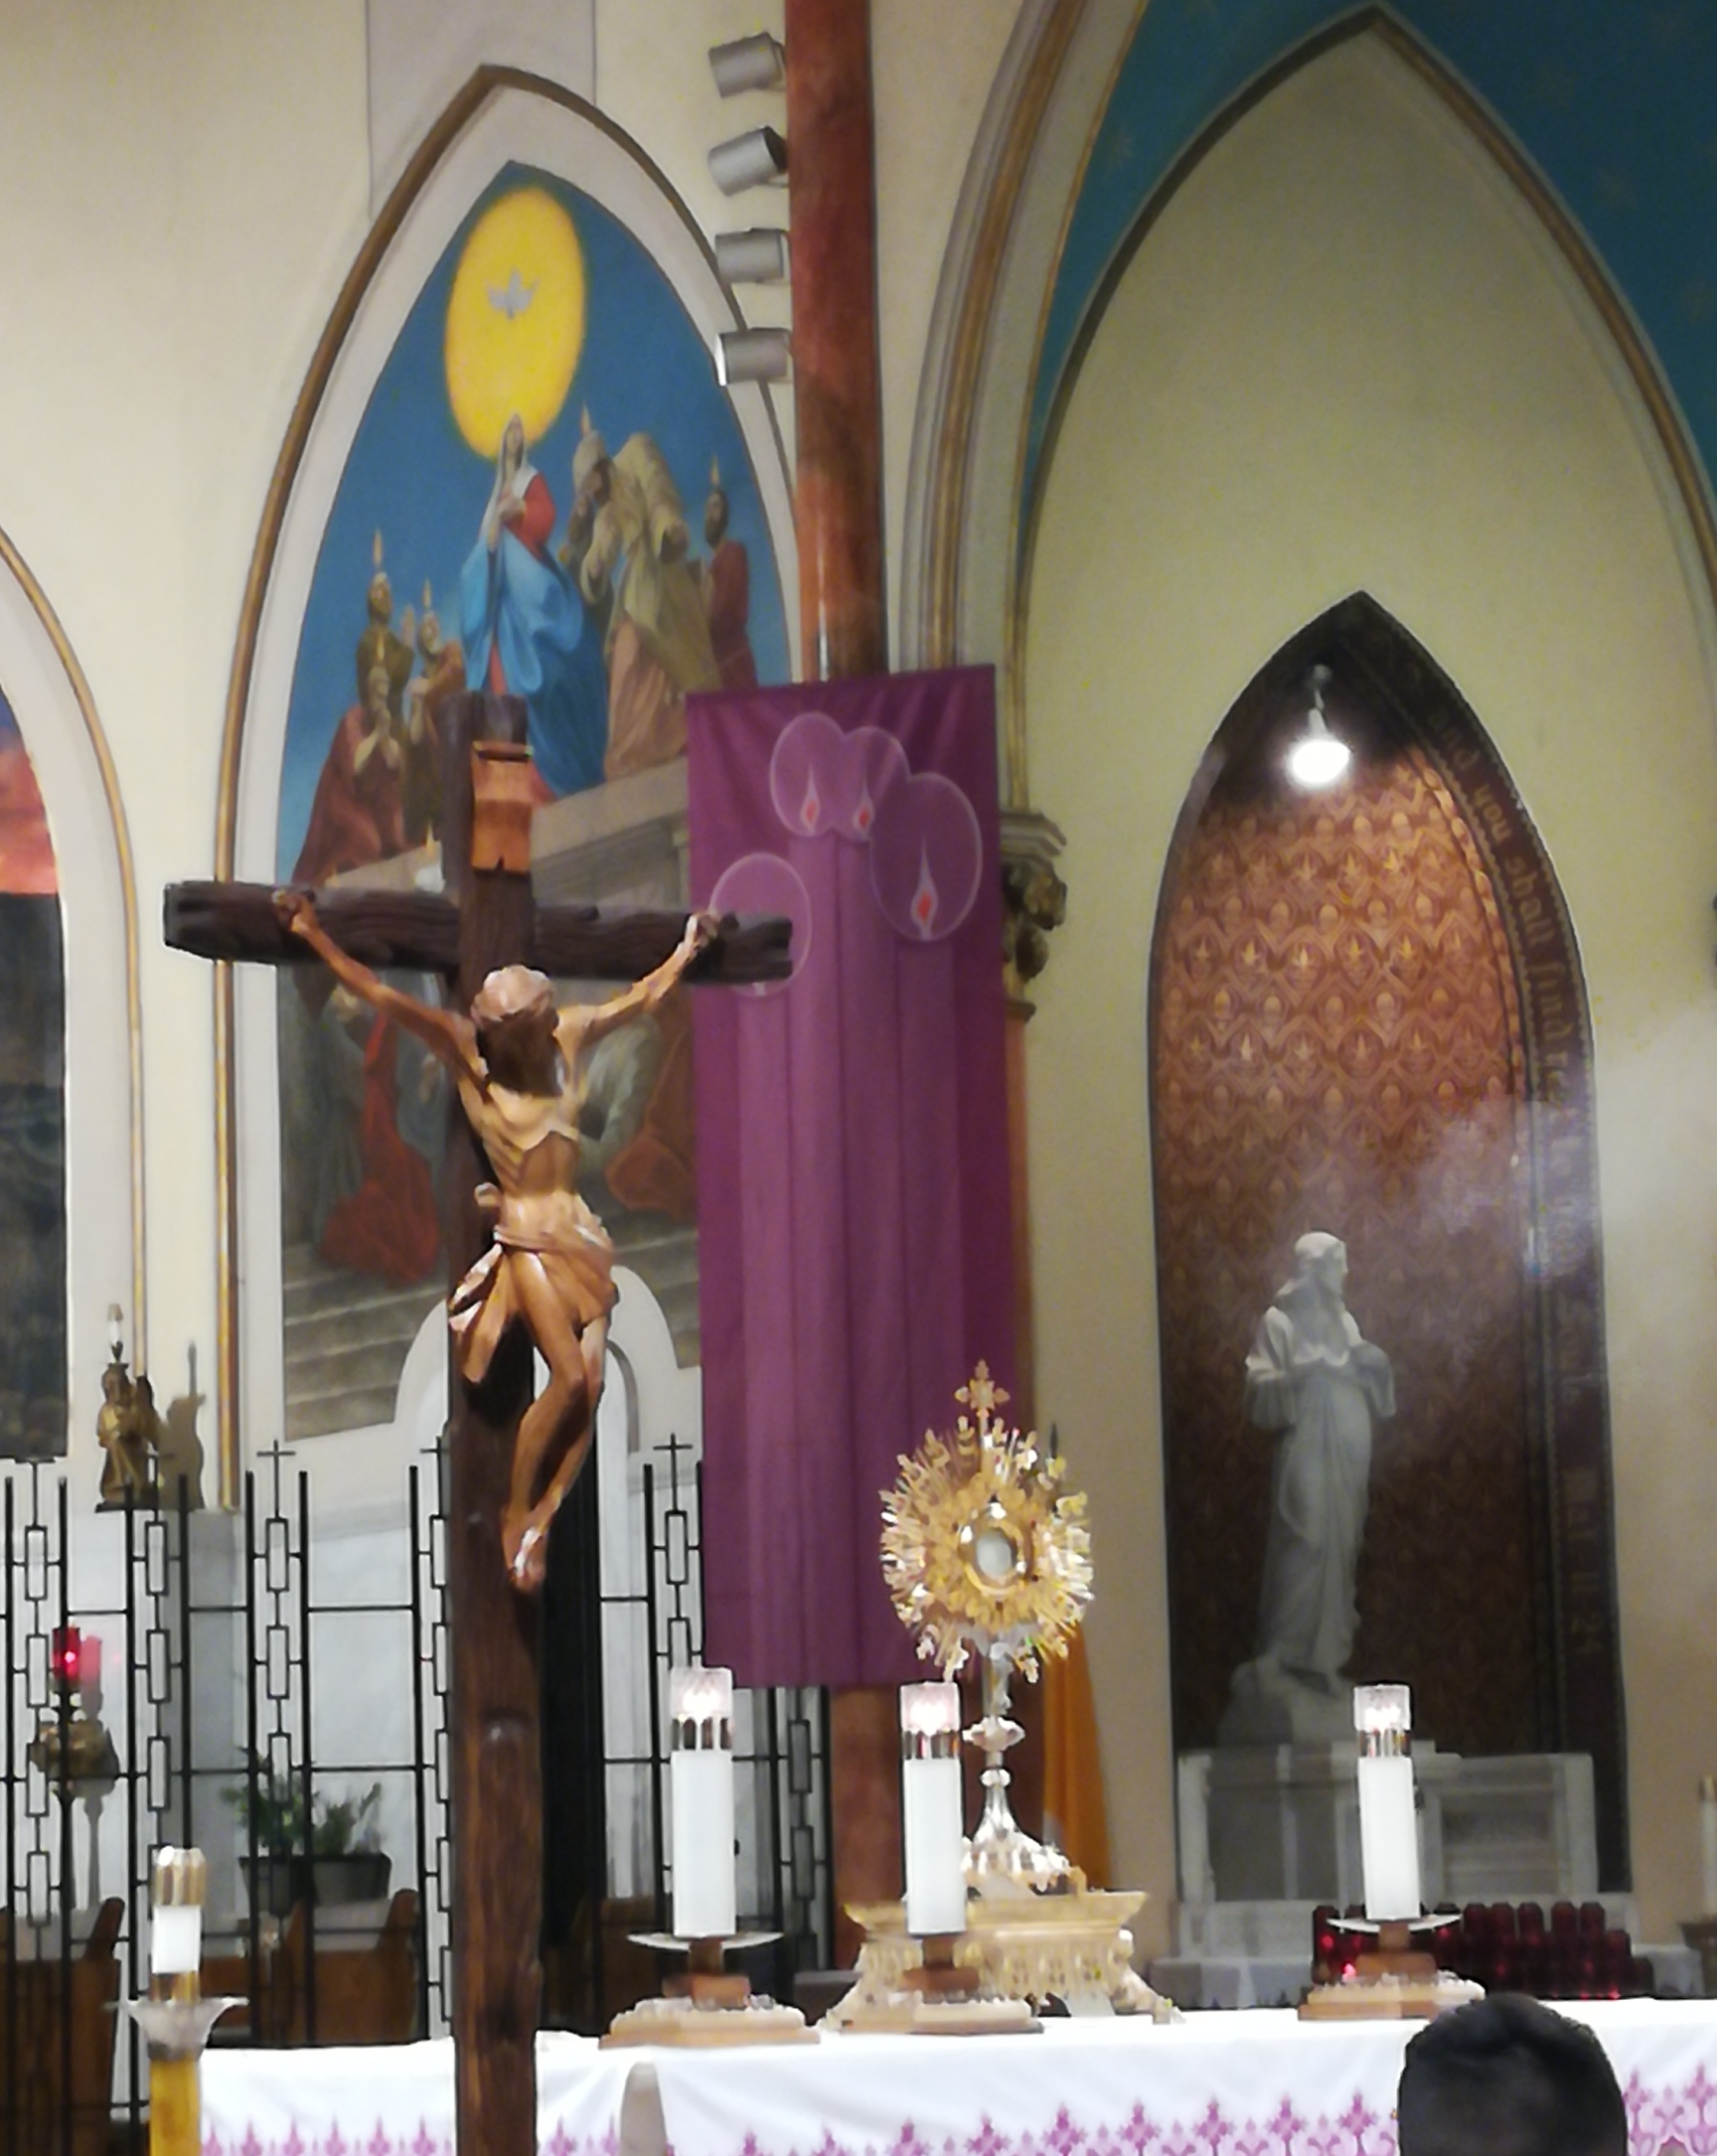 A cross and crucifix in the middle of a church.